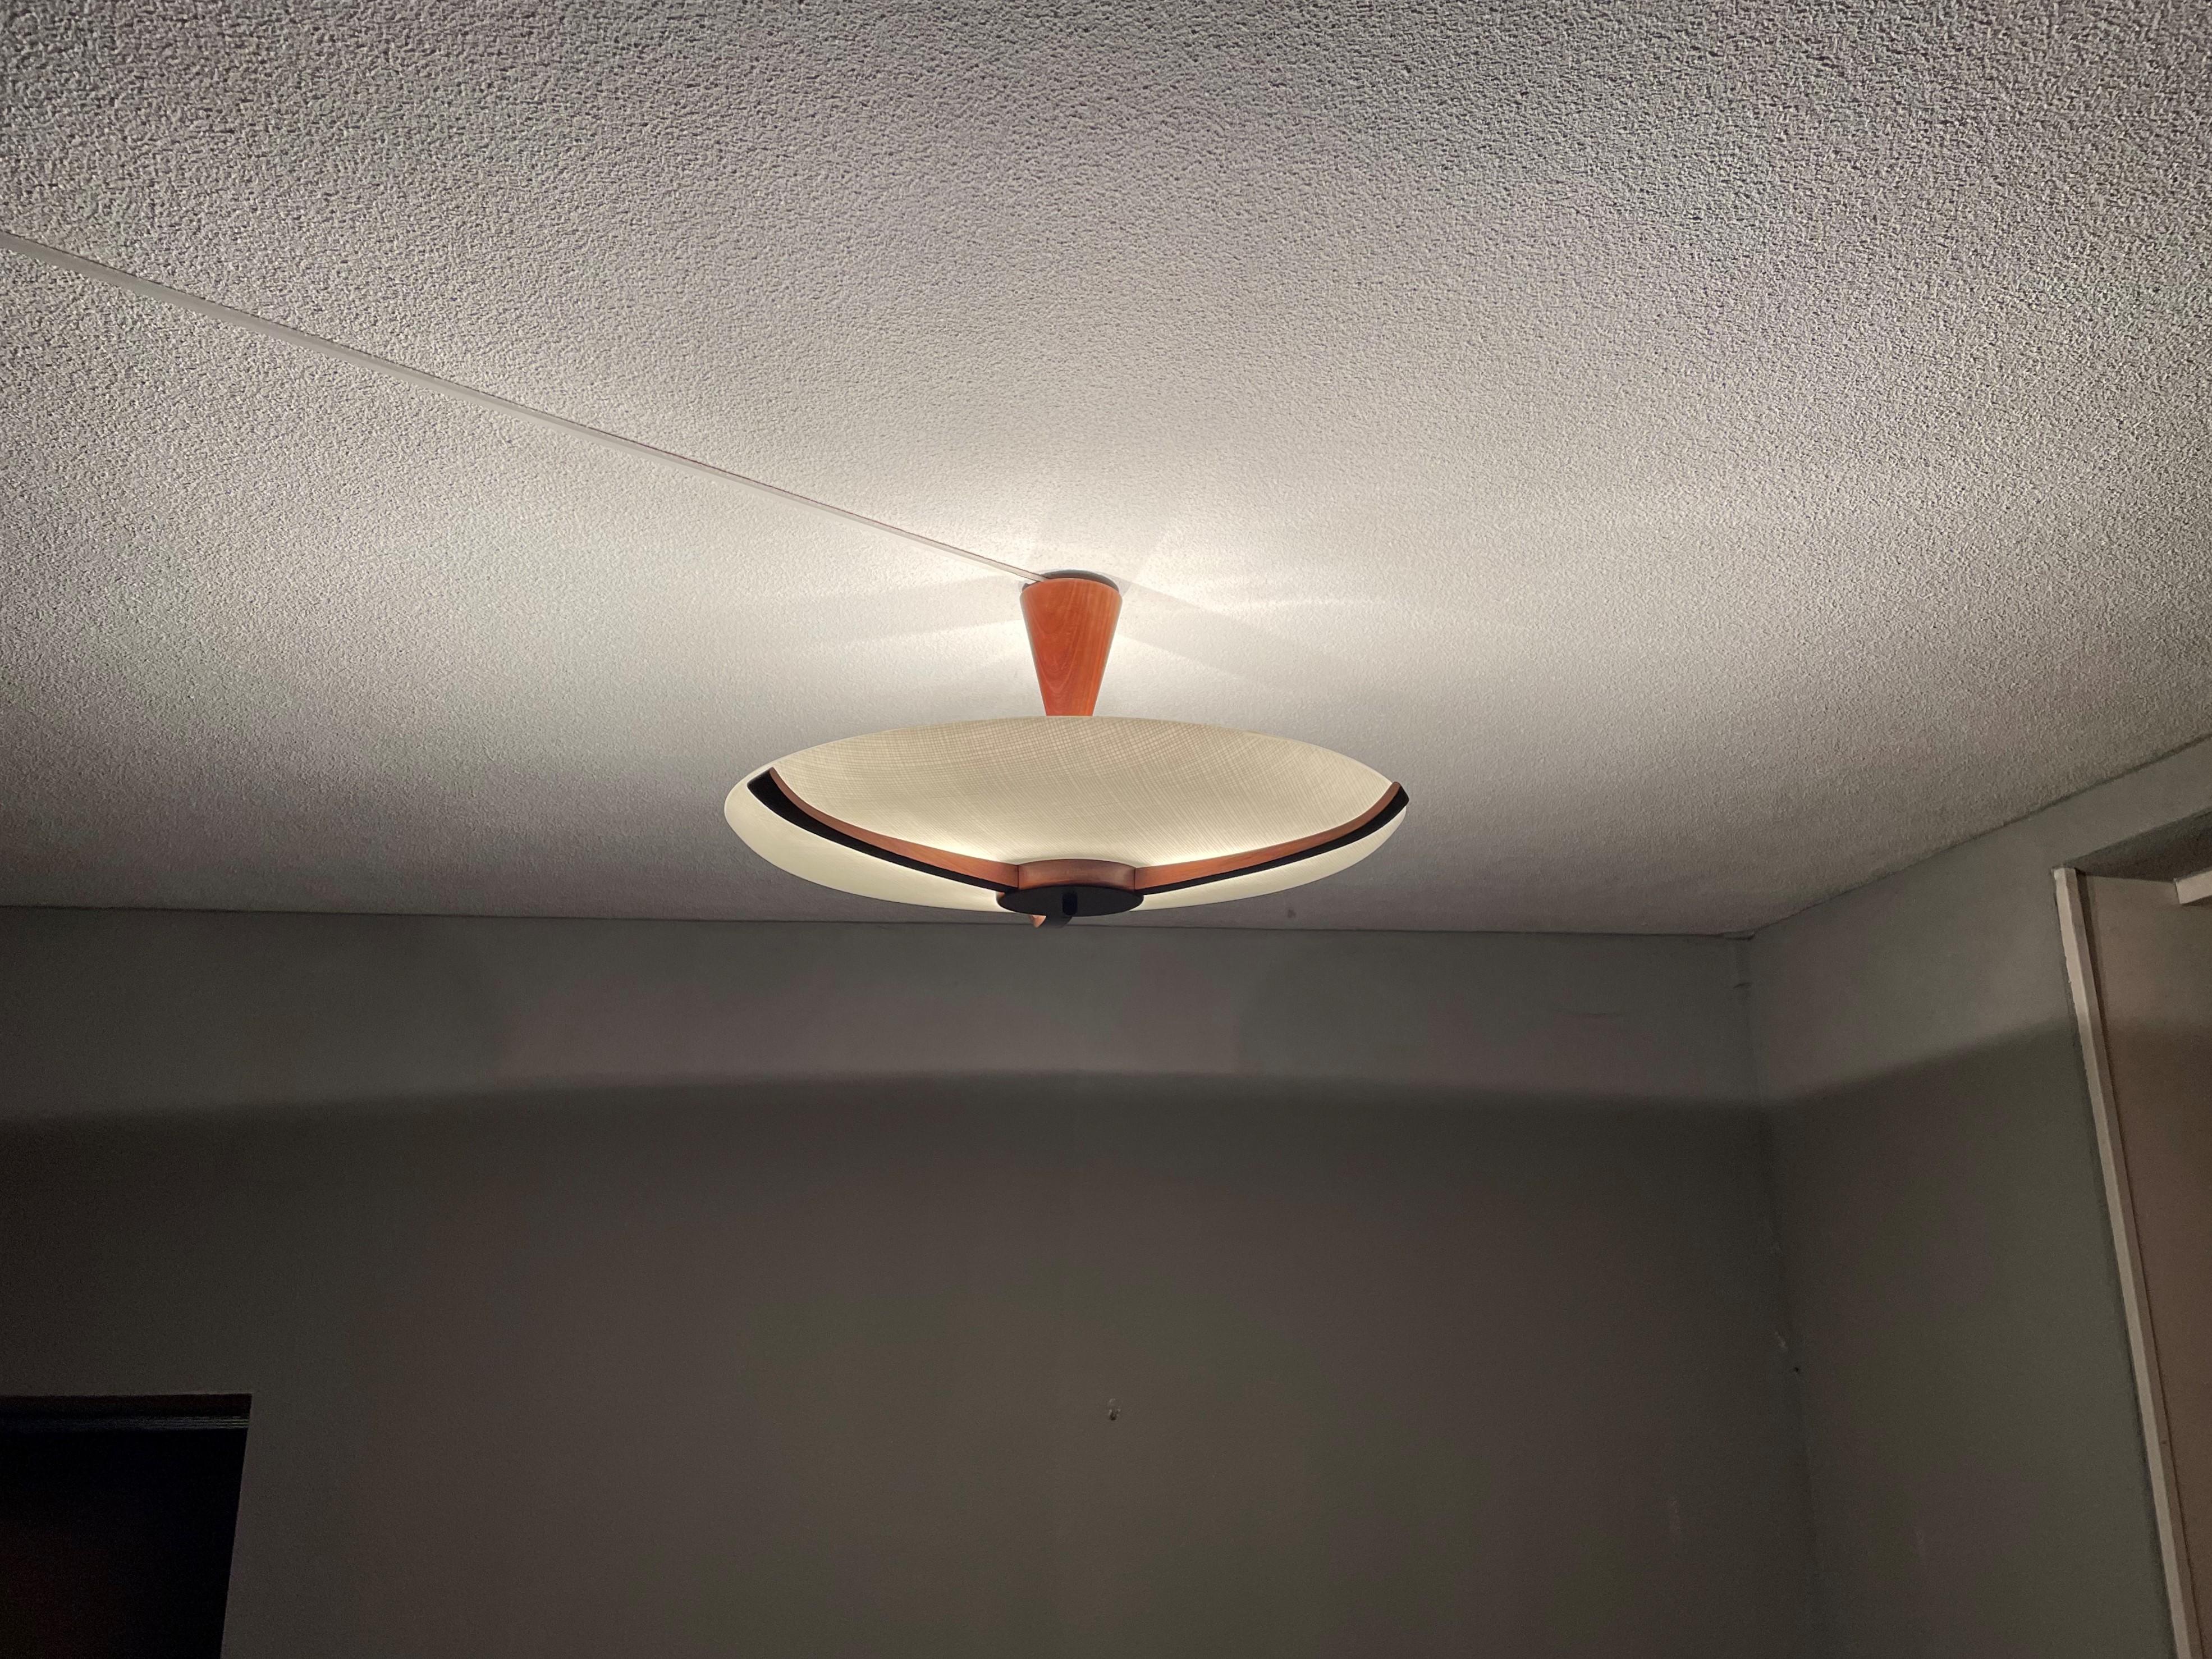 Great Mid-Century Modern ceiling light with teakwood and 'woven' pattern in the glass shade.

This vintage, three-light flush mount has a beautiful look and feel and you will hardly ever find a light fixture from the Mid-Century Modern era with a